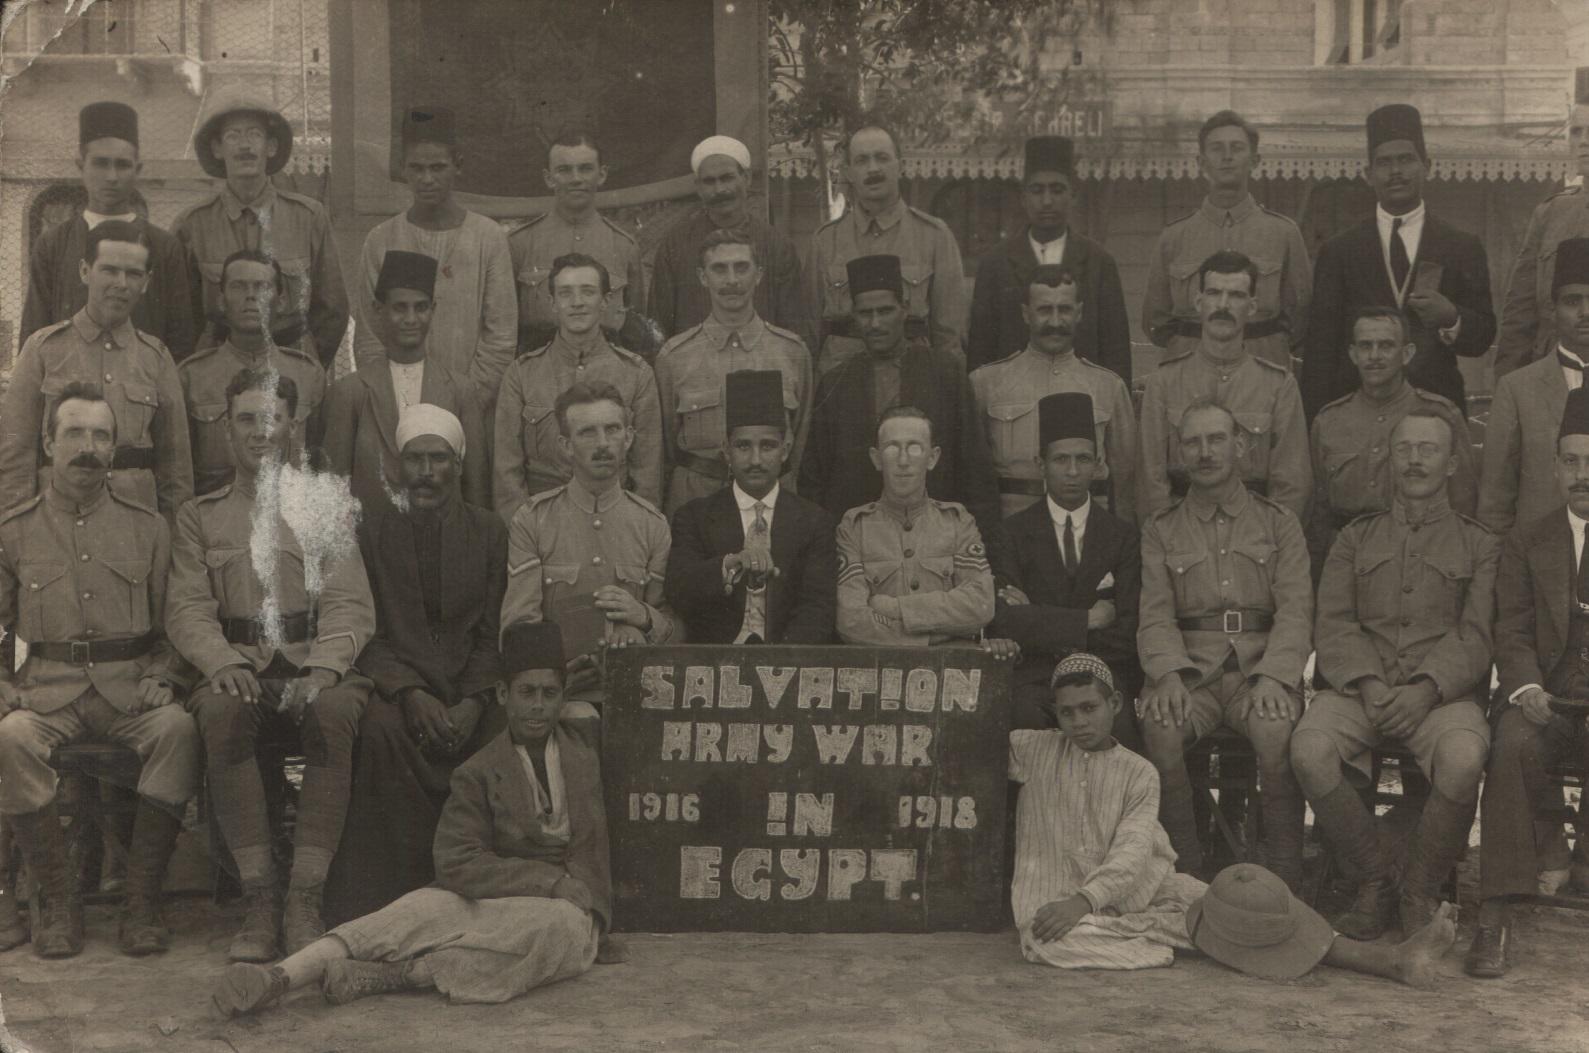 The Salvation Army in Egypt, 1918.